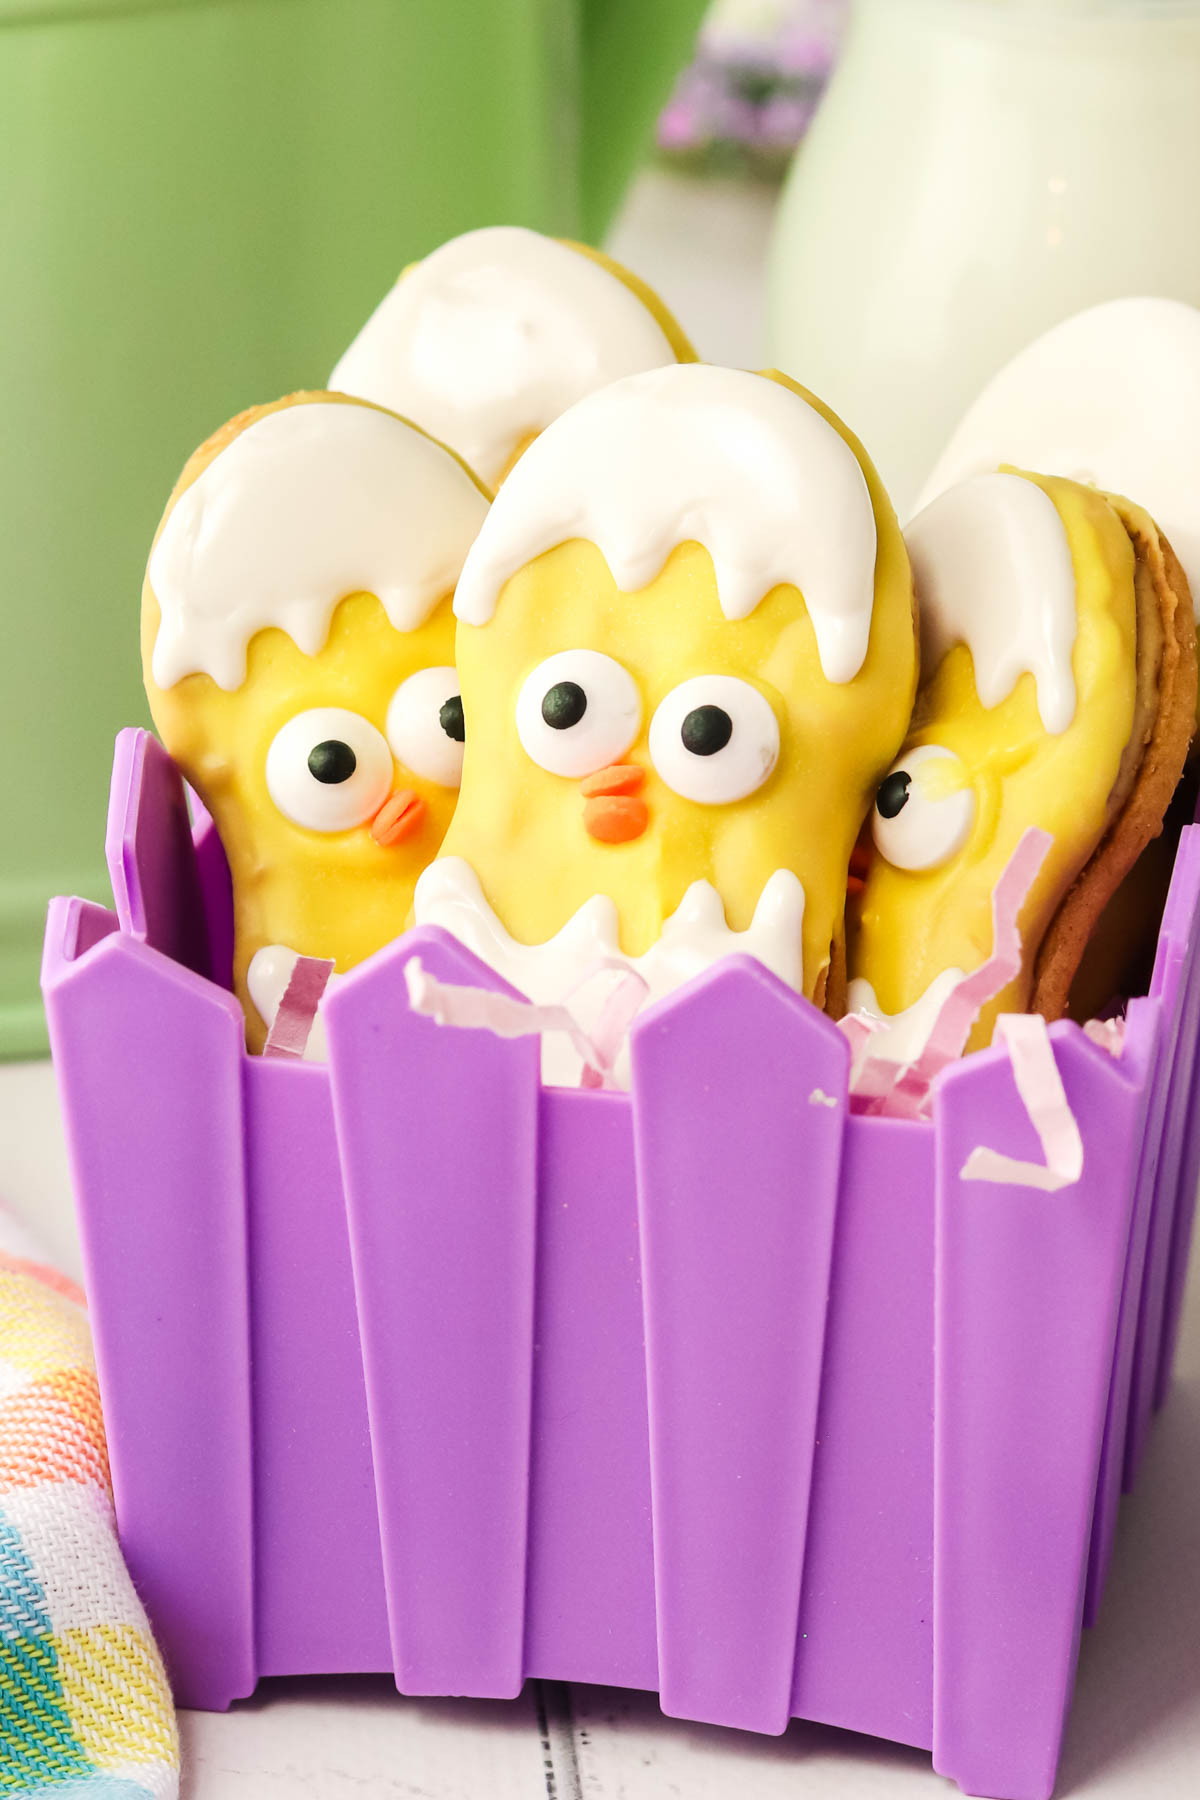 Easter chick cookies in a purple basket.